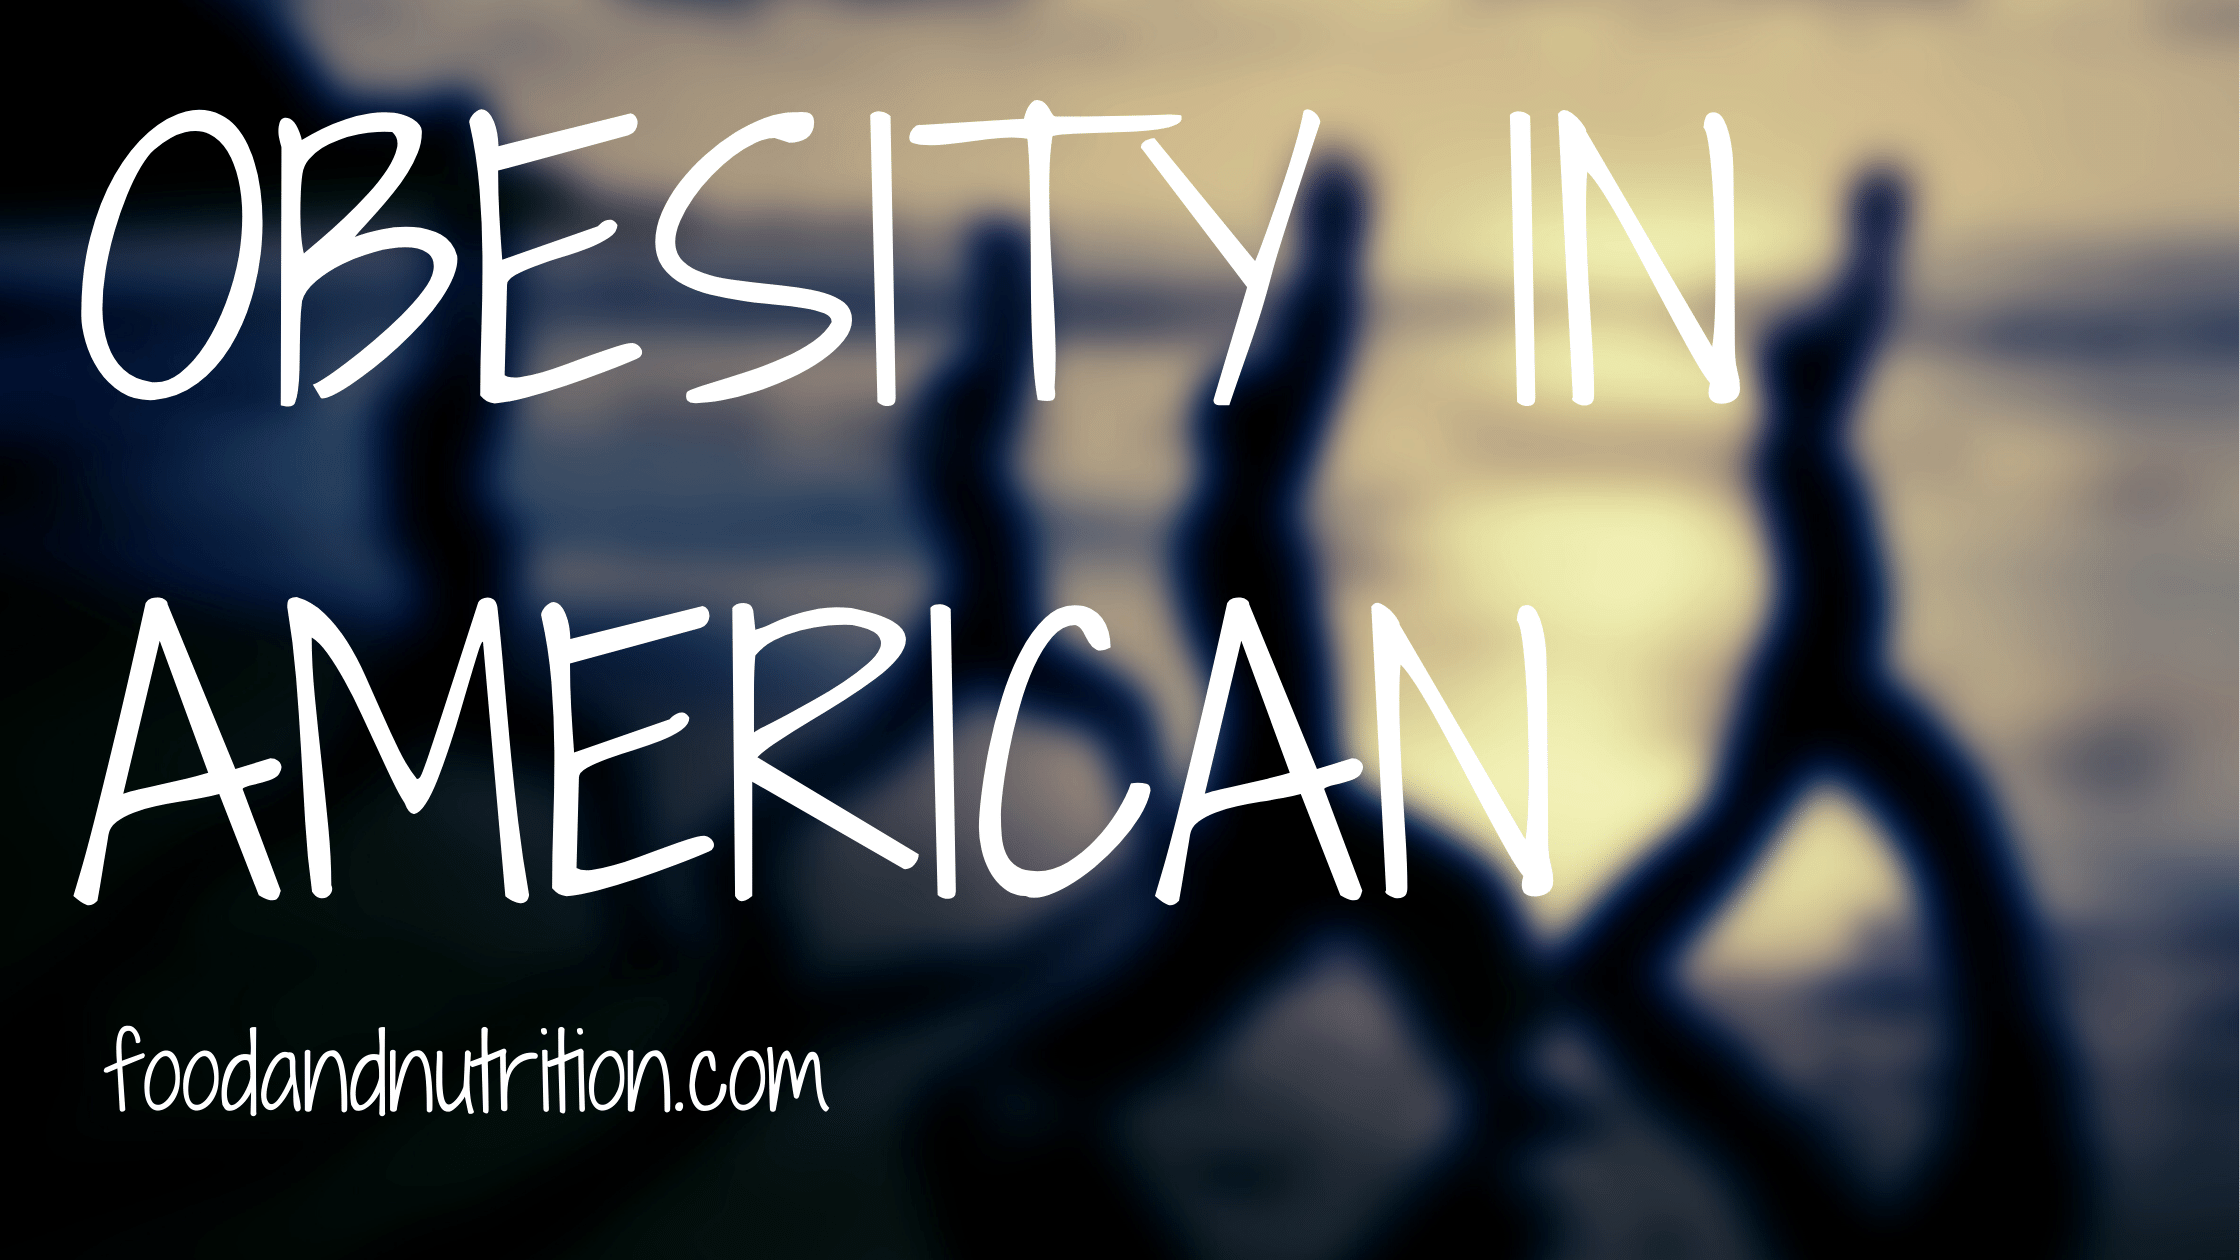 The Obesity Epidemic in America: Understanding the Causes and Solutions